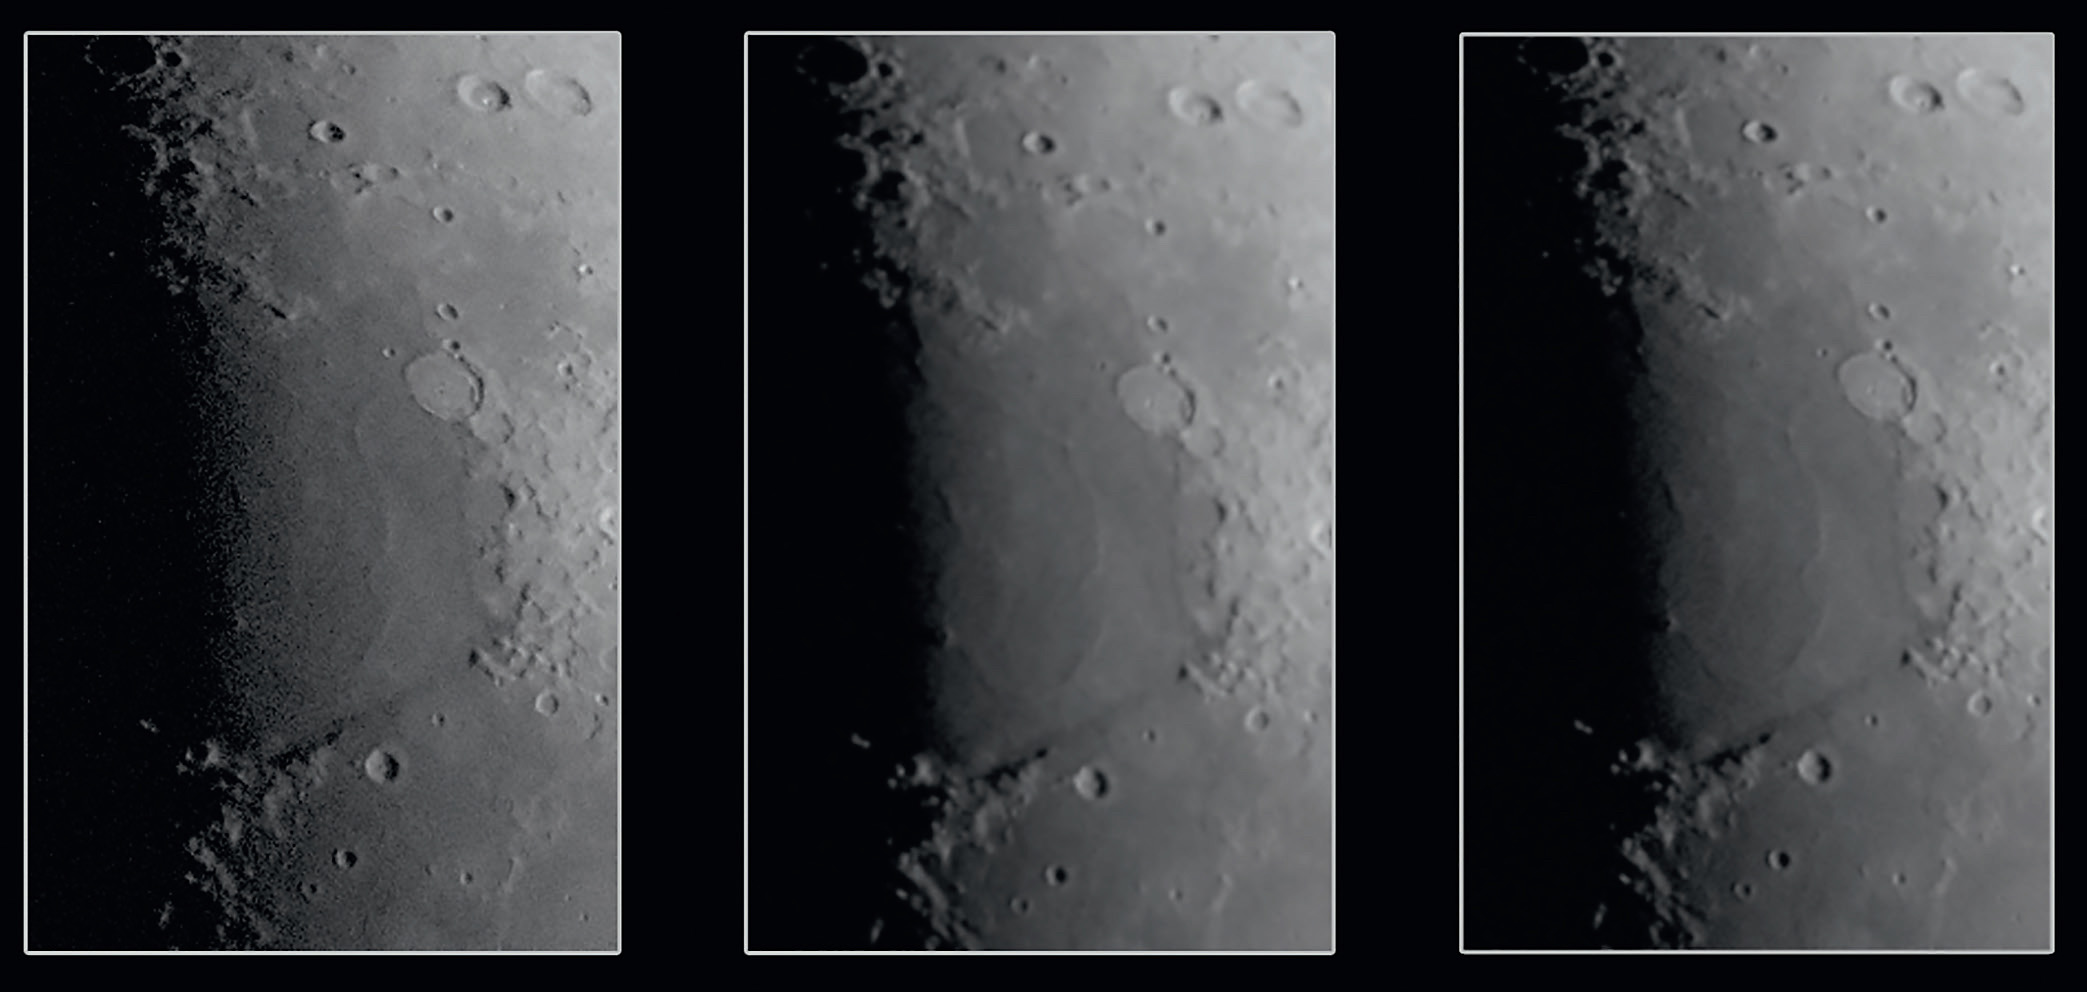 Enlarged sections illustrate the differences: without a reducer (left), the resolution is best, but structures in Mare Serenitatis at the terminator are drowned out by noise. With a reducer (centre), the depiction is much better, but the sharpness of detail has visibly deteriorated at the same time. Right: an image retroactively reduced using software delivers slightly more image noise than the original reducer image. M. Weigand